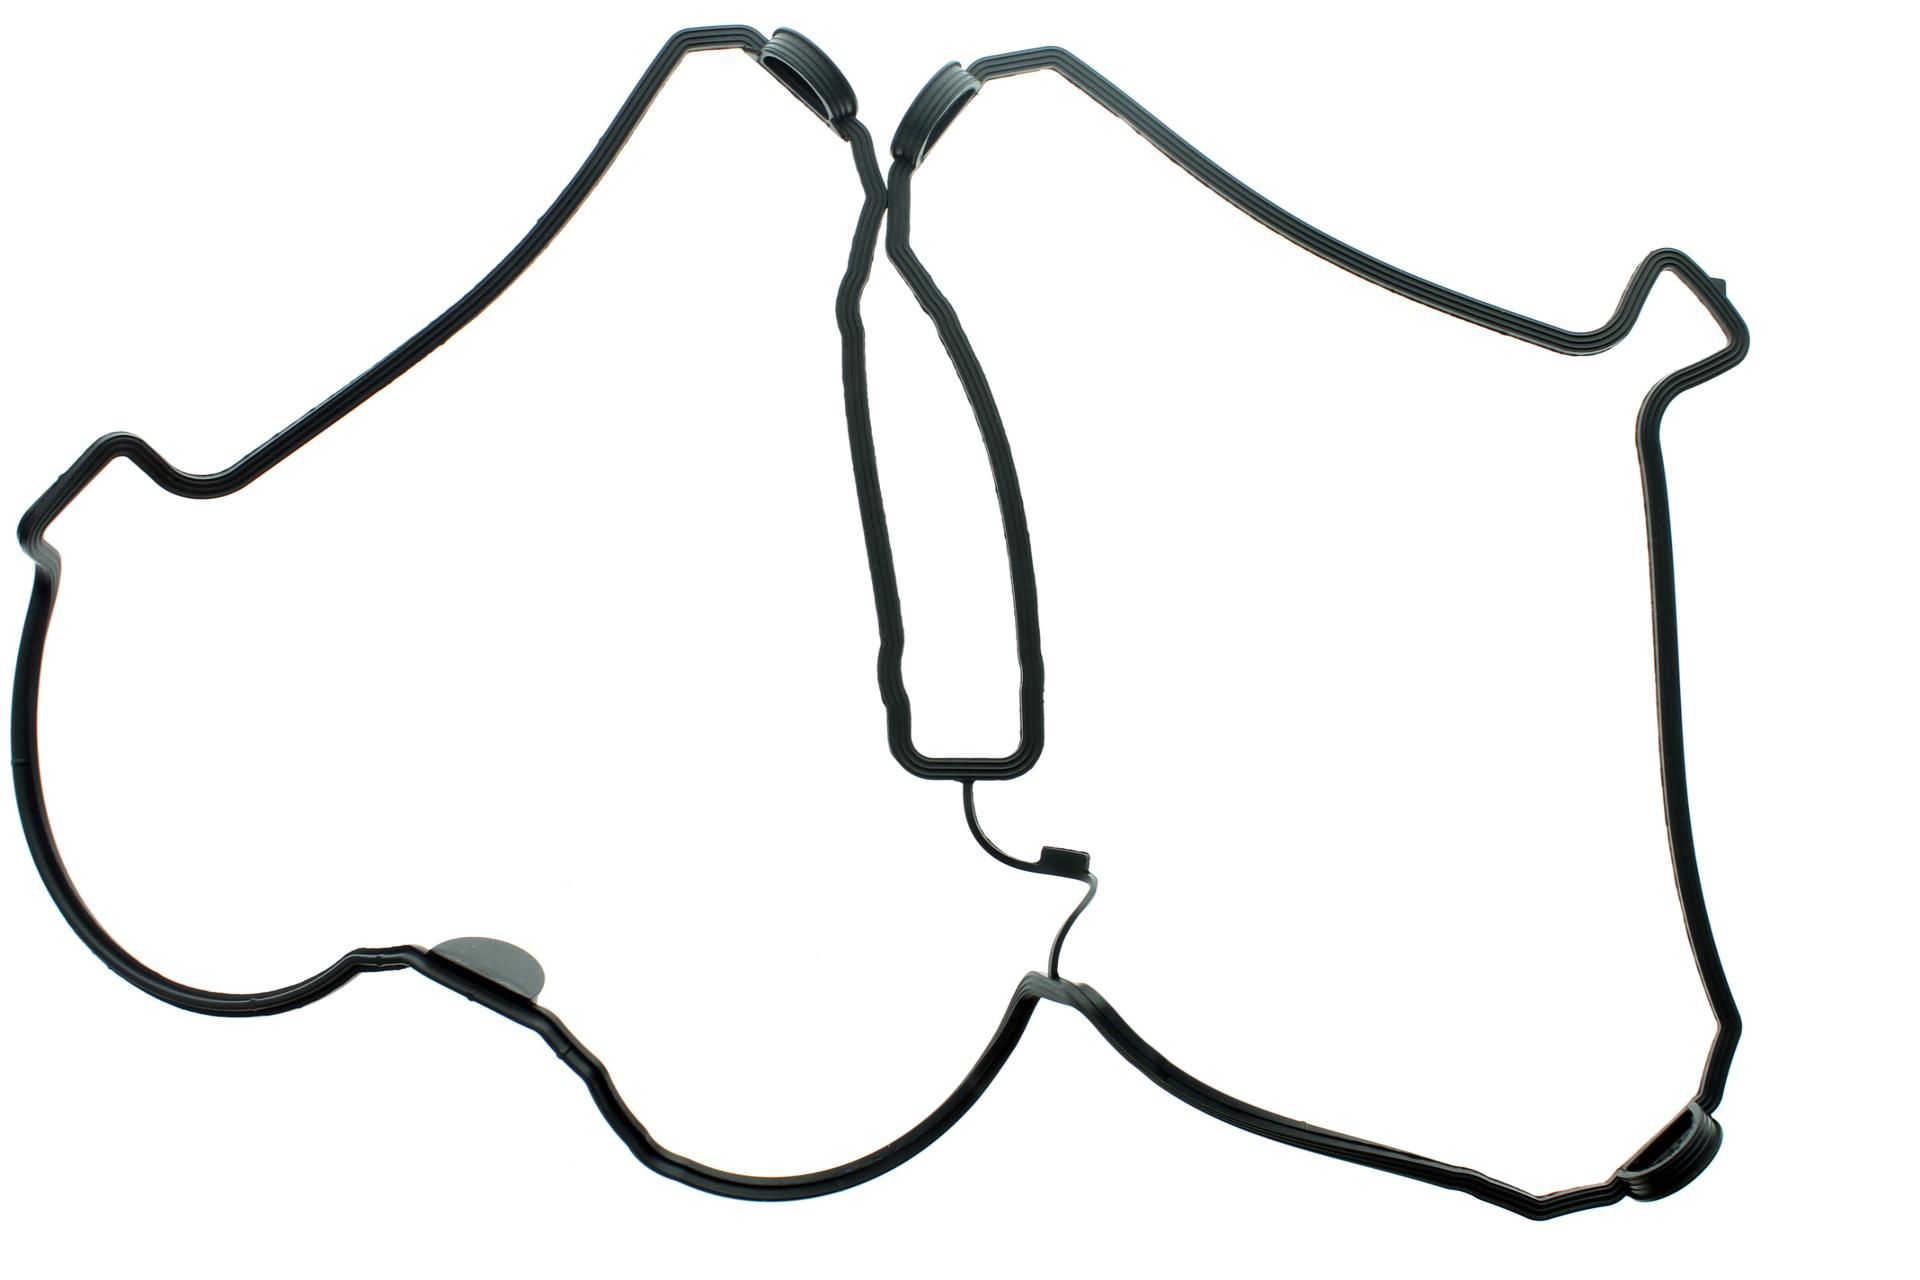 3GM-11193-00-00 Superseded by 4SV-11193-00-00 - GASKET, HEAD COVER